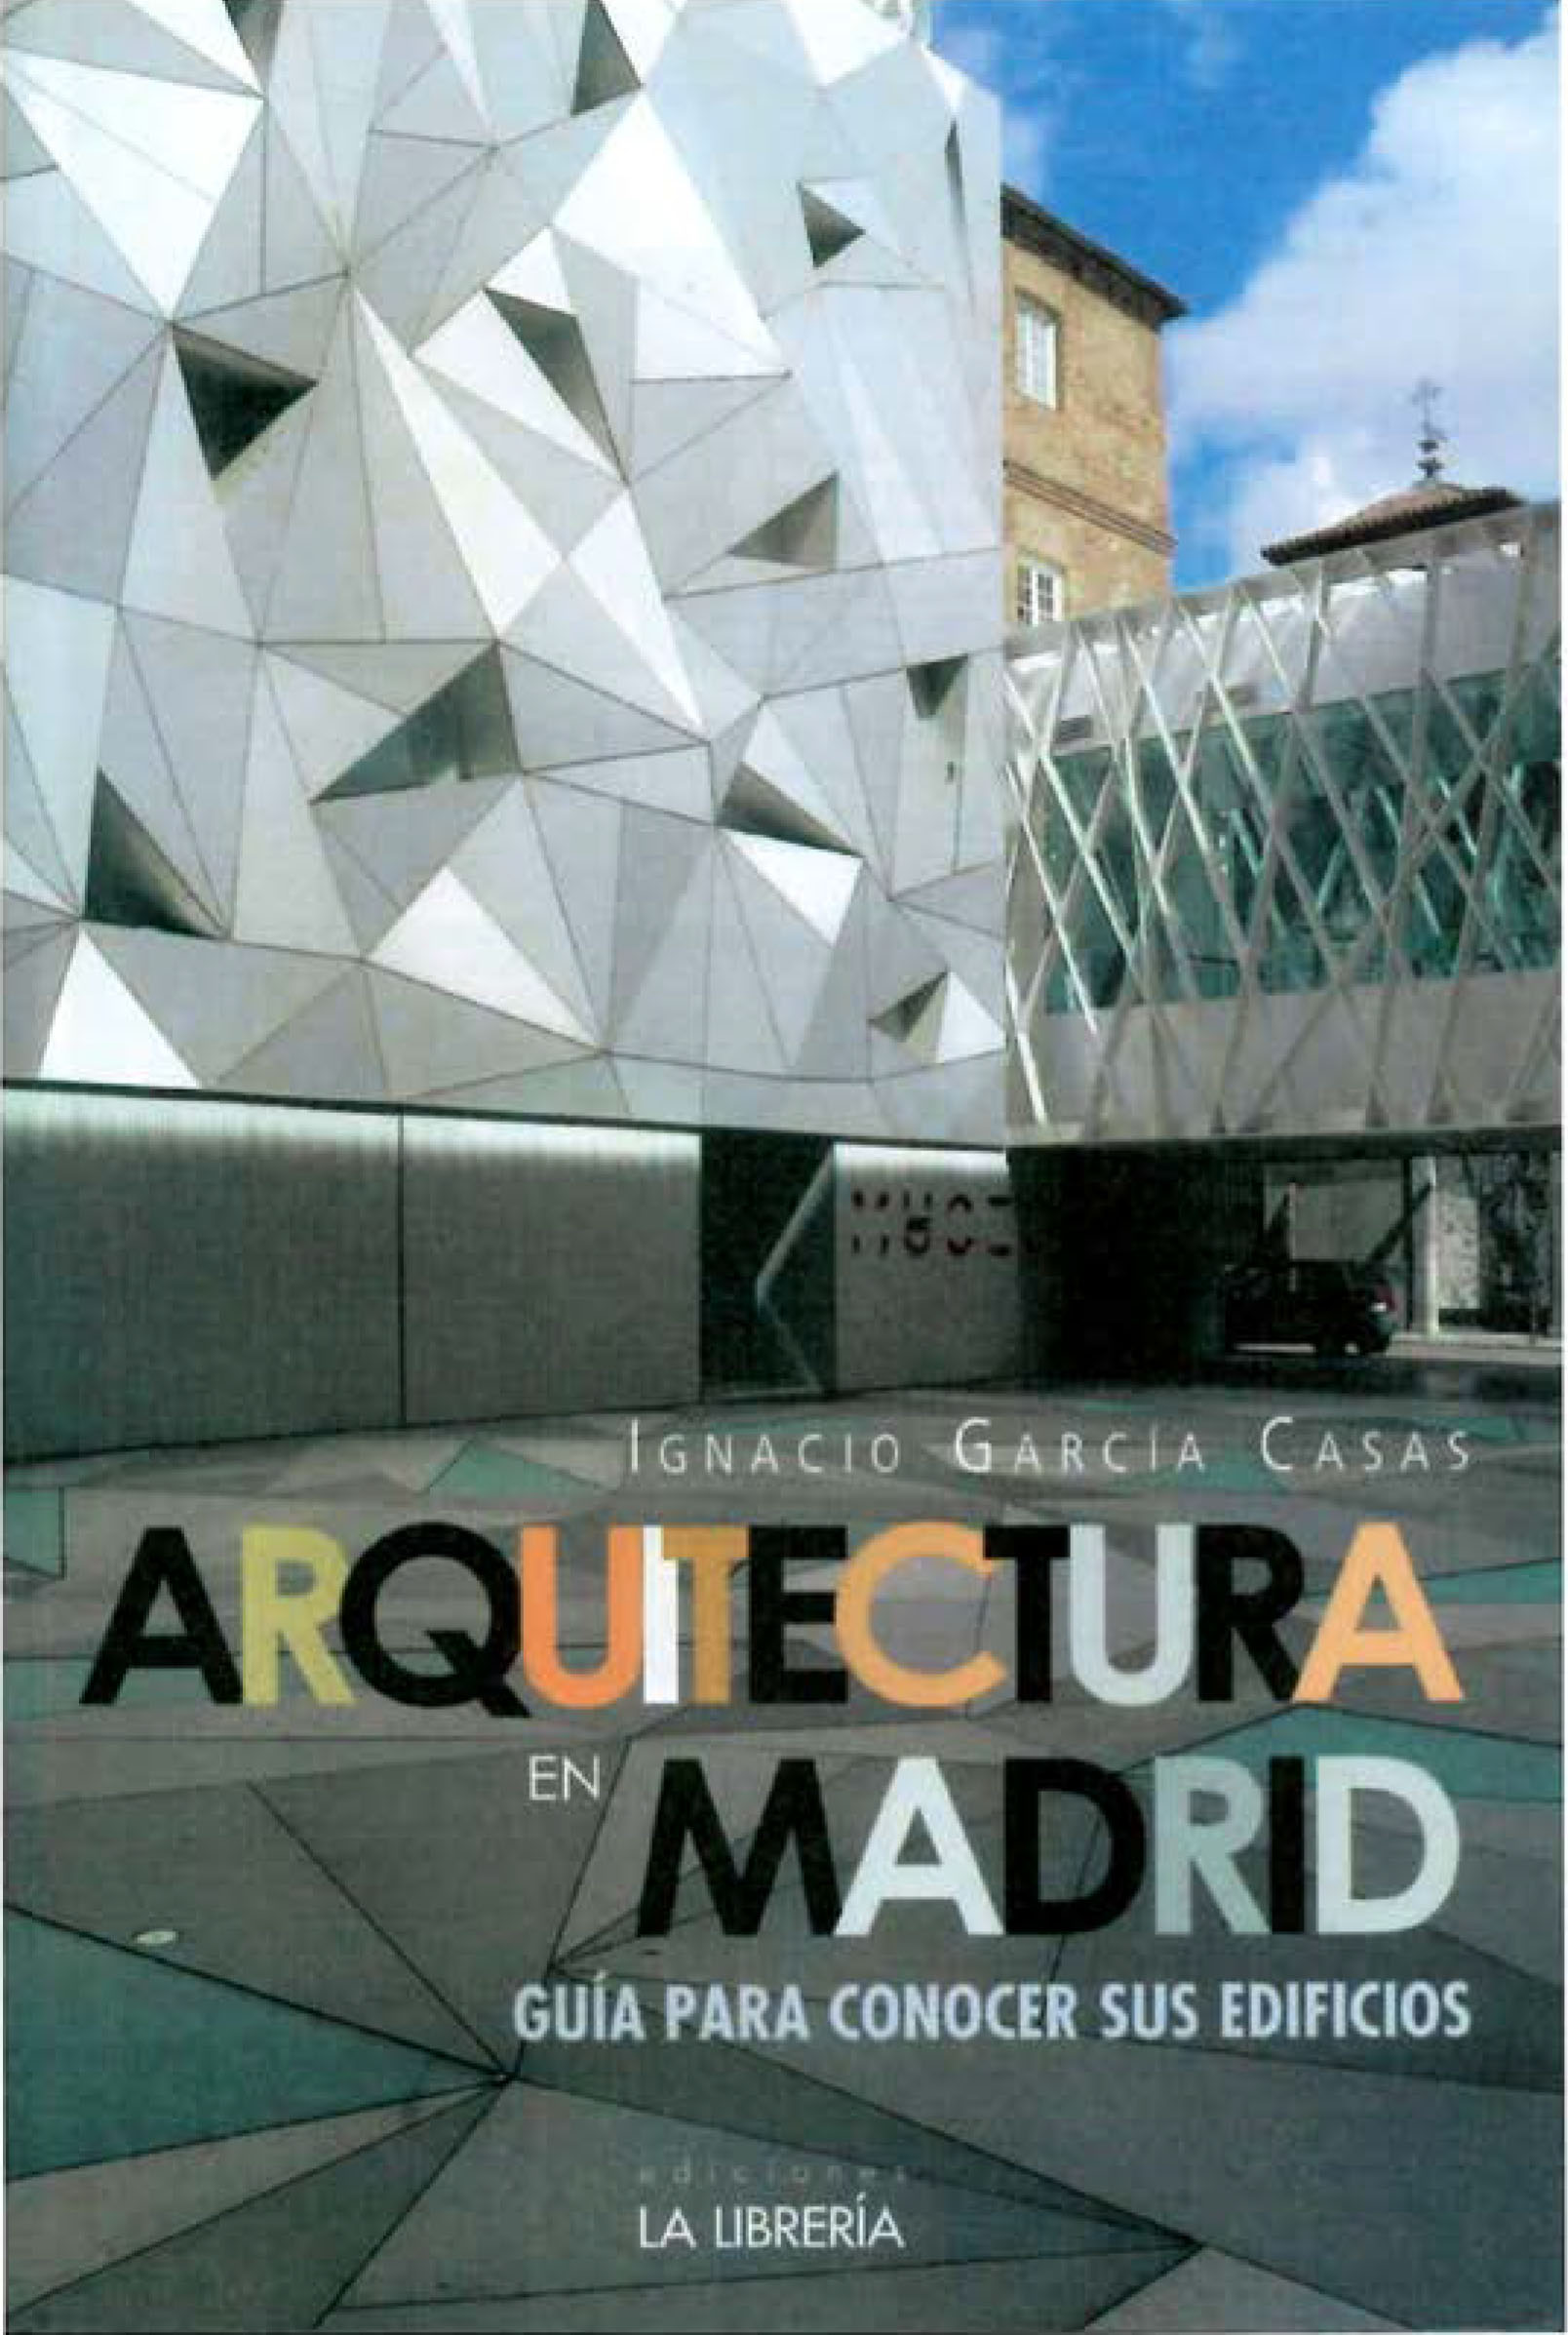 architecture of madrid, guide to know its buildings